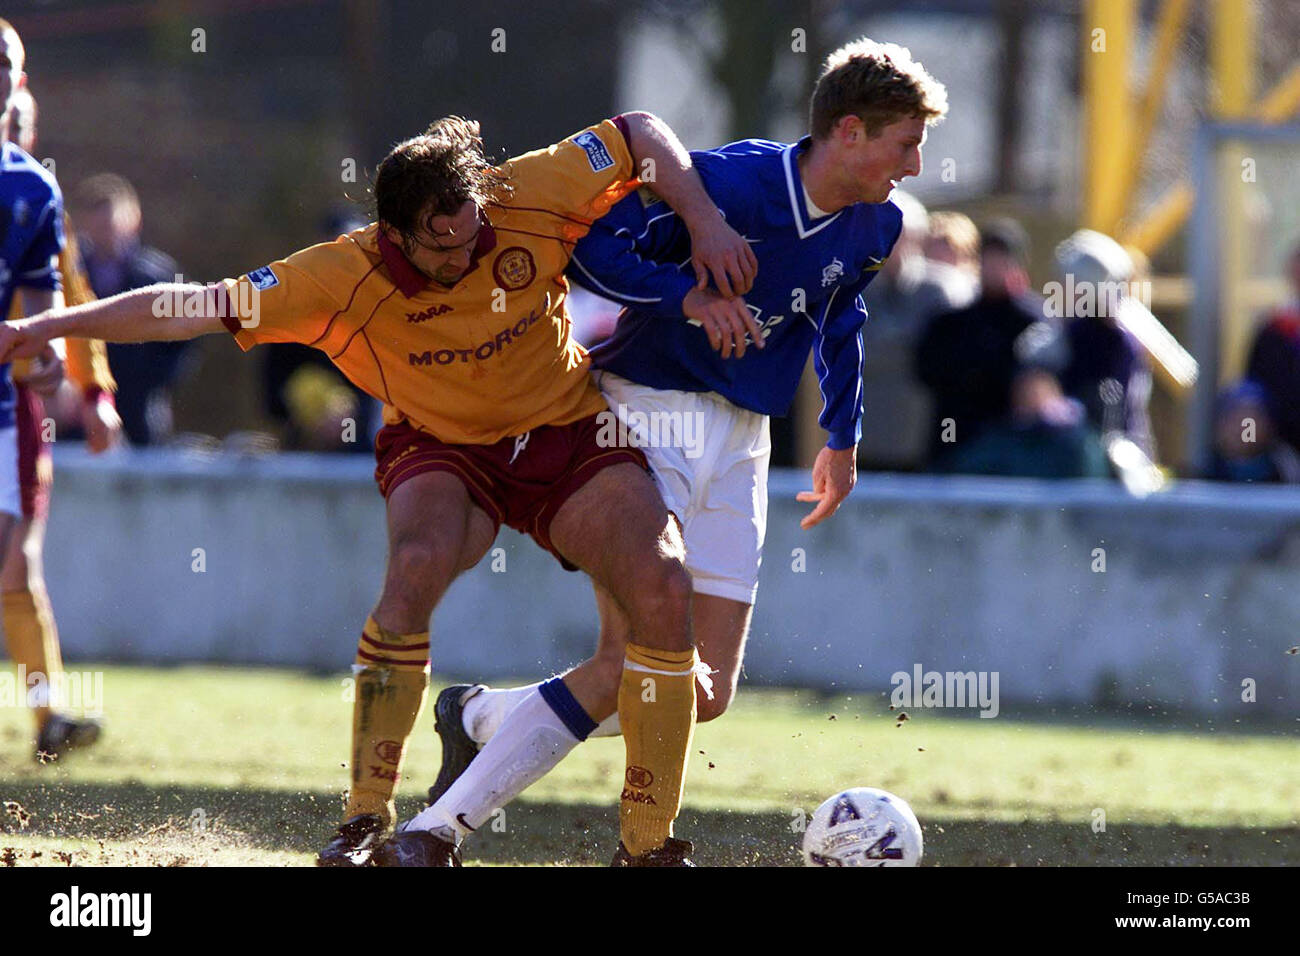 Tore Andre Flo of Rangers (right) takes on Motherwell's Greg Strong during the FA Carling Premiership game at Fir Park, Motherwell. Stock Photo